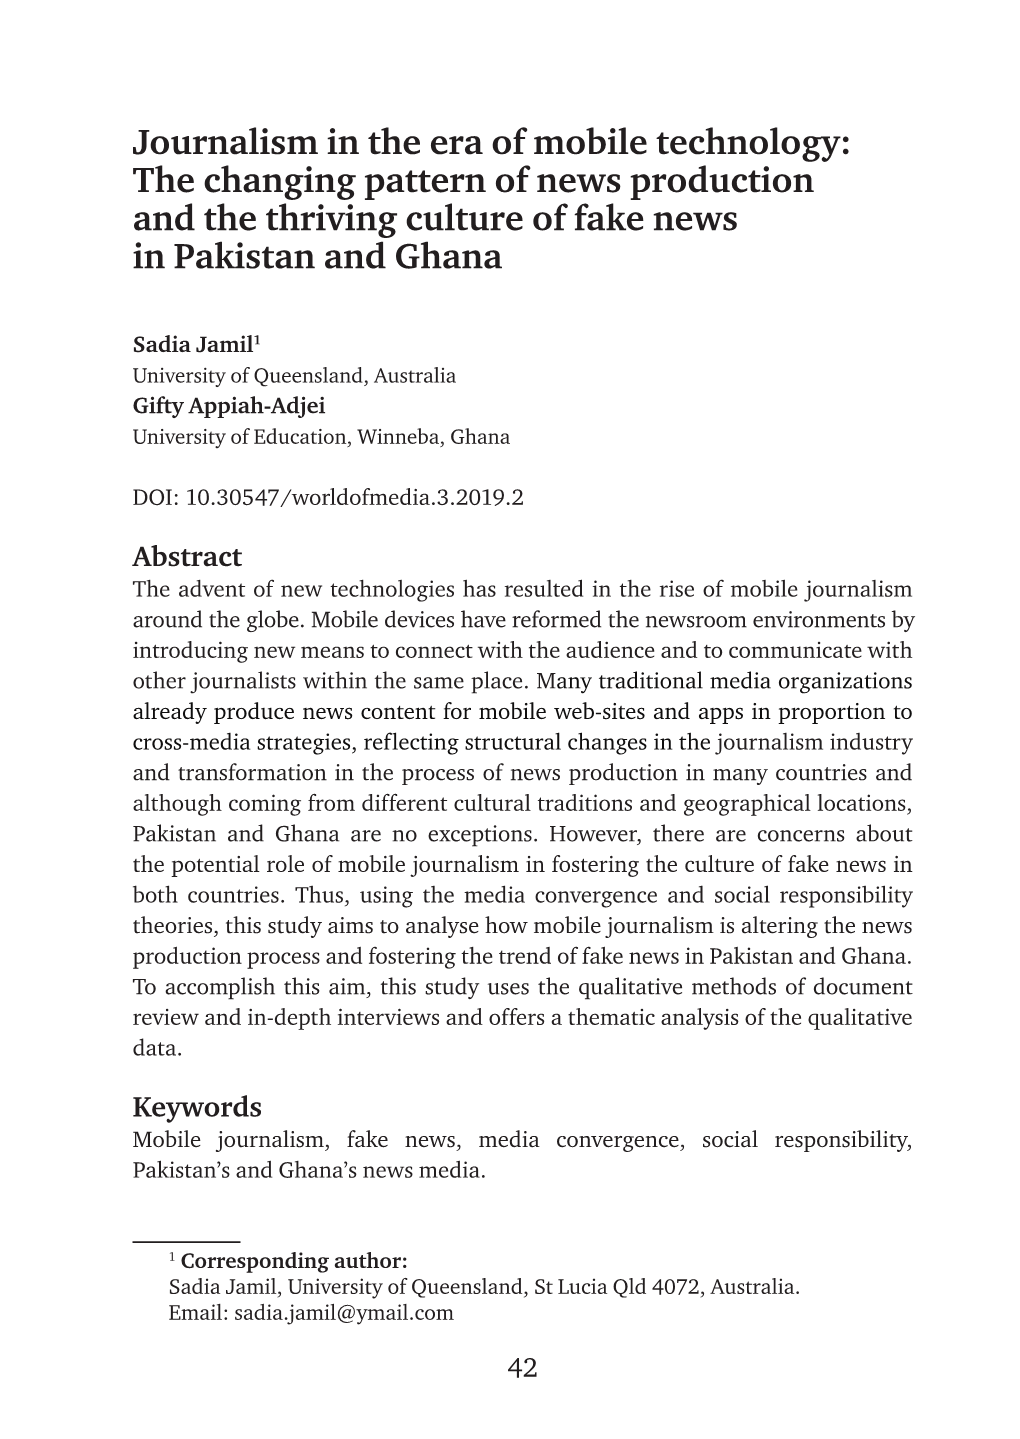 Journalism in the Era of Mobile Technology: the Changing Pattern of News Production and the Thriving Culture of Fake News in Pakistan and Ghana